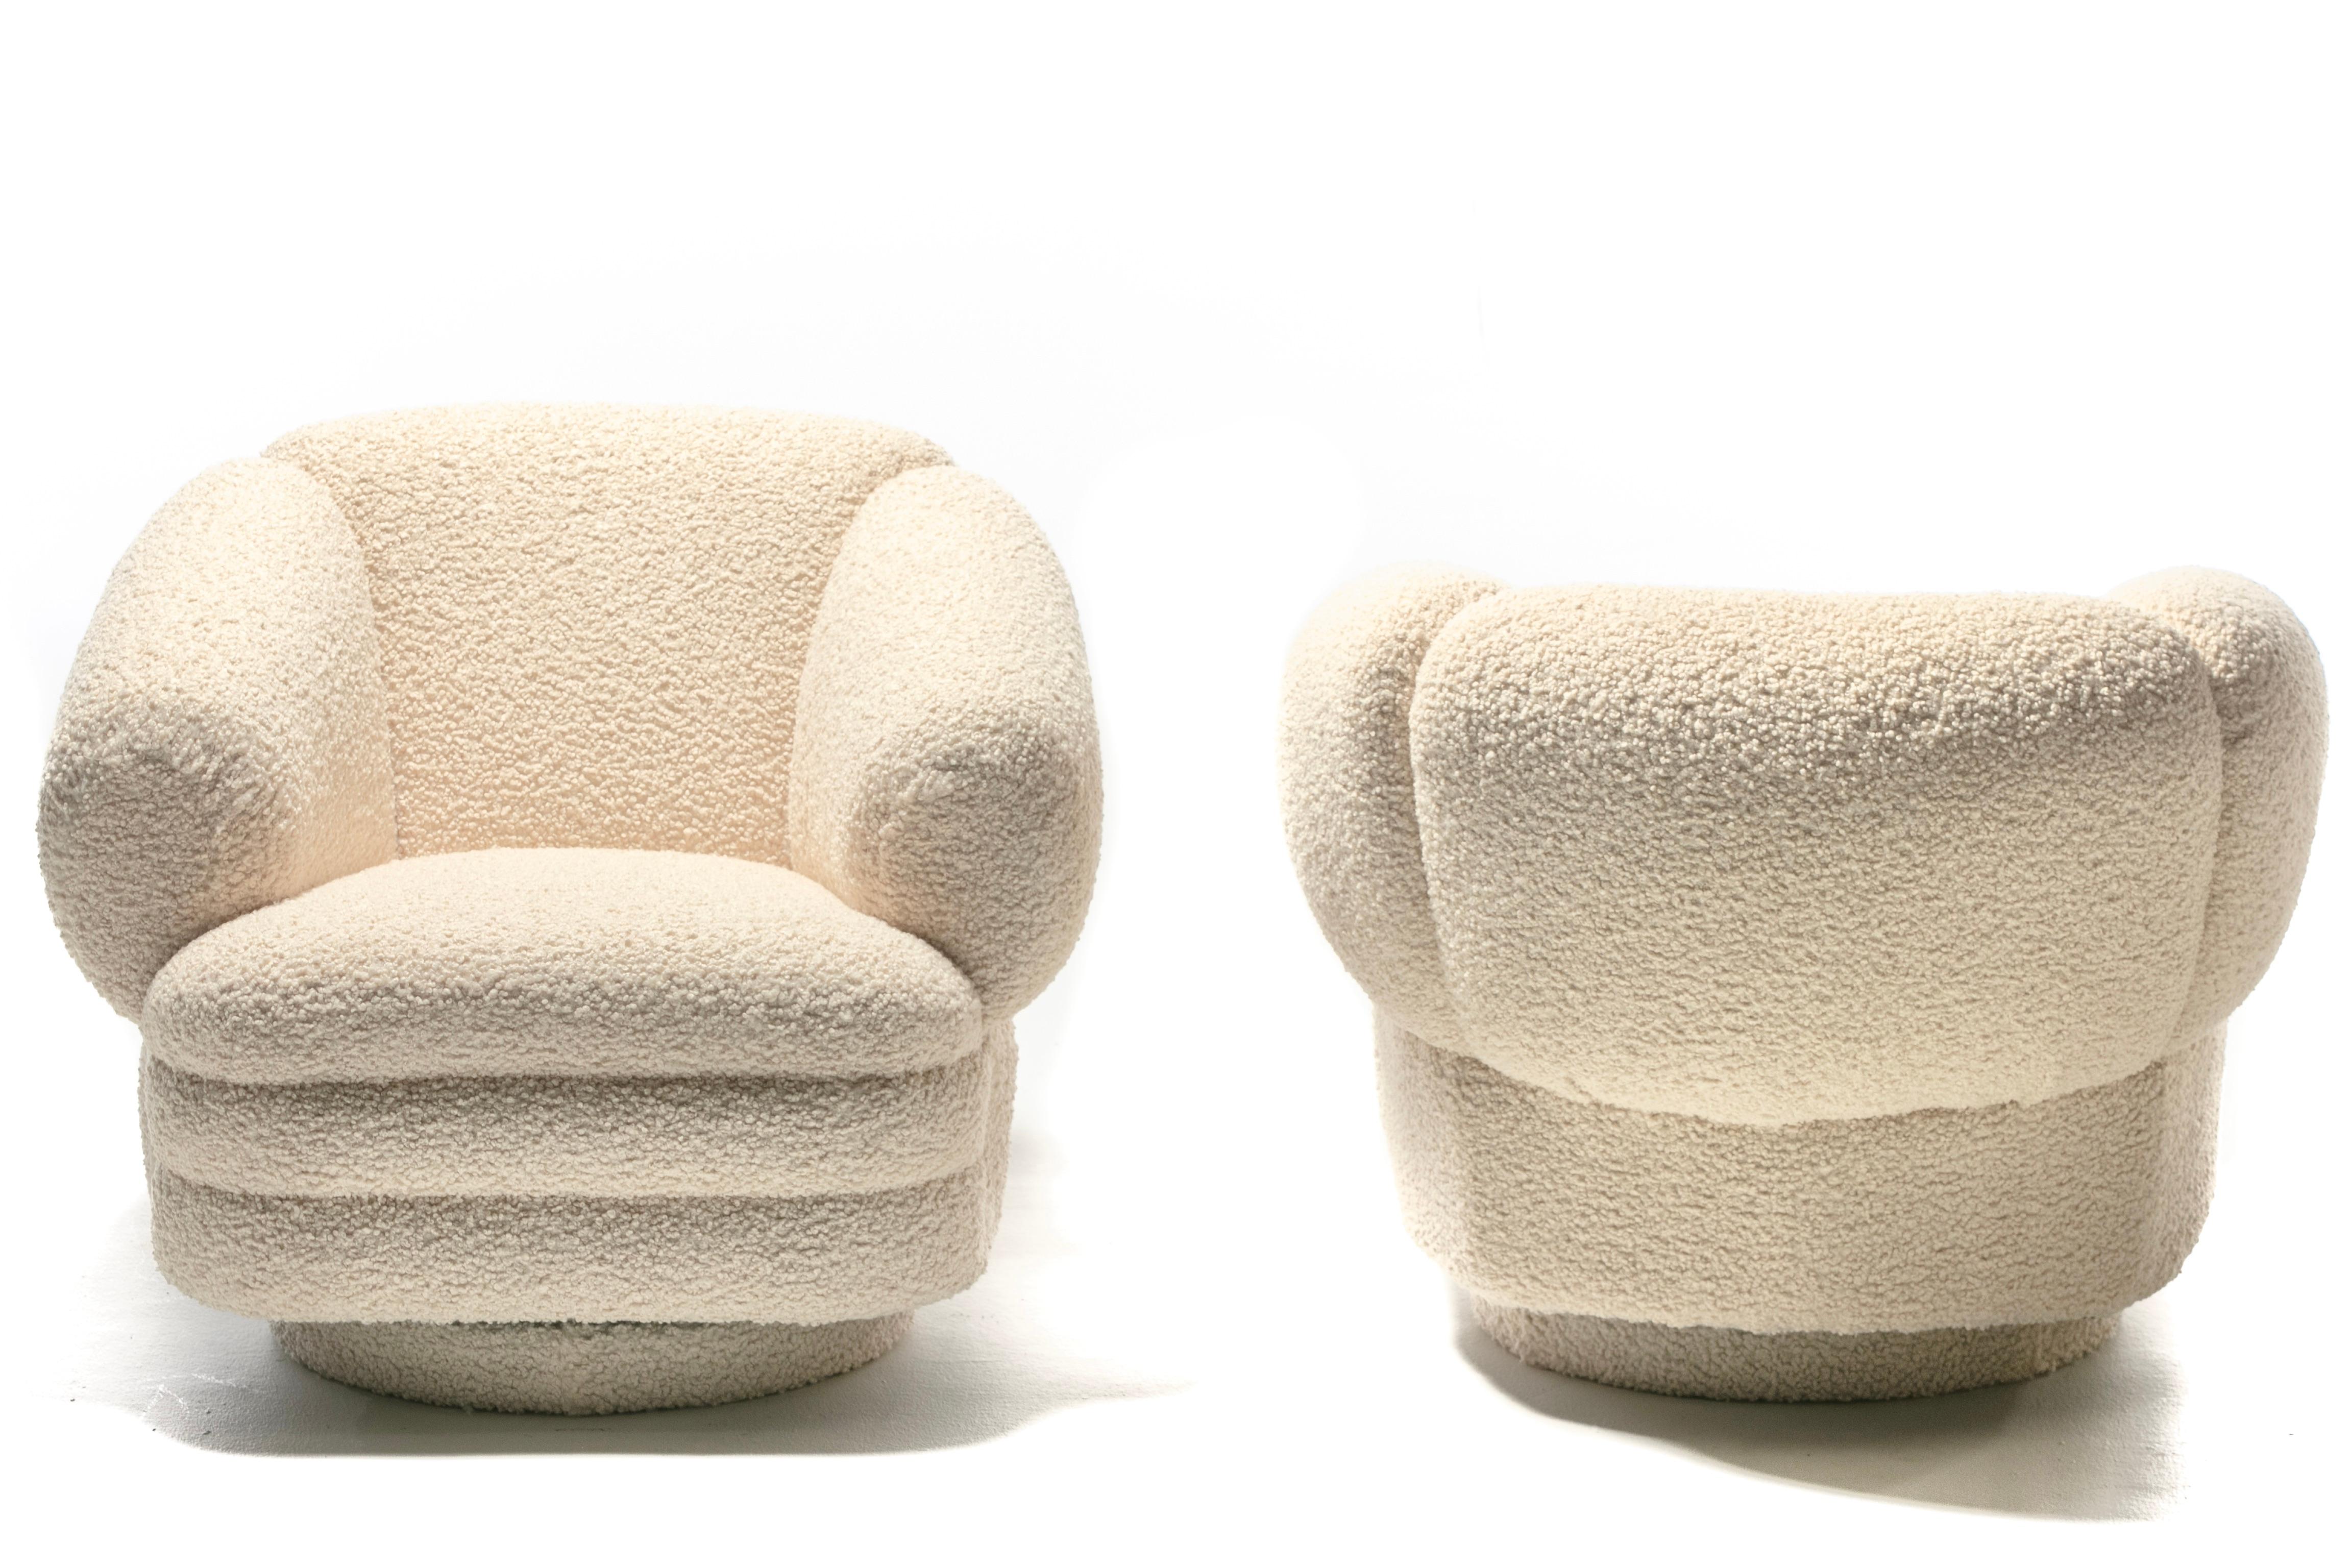 Vladimir Kagan Post Modern Ivory Bouclé Swivel Chairs & Ottoman for Directional In Good Condition For Sale In Saint Louis, MO